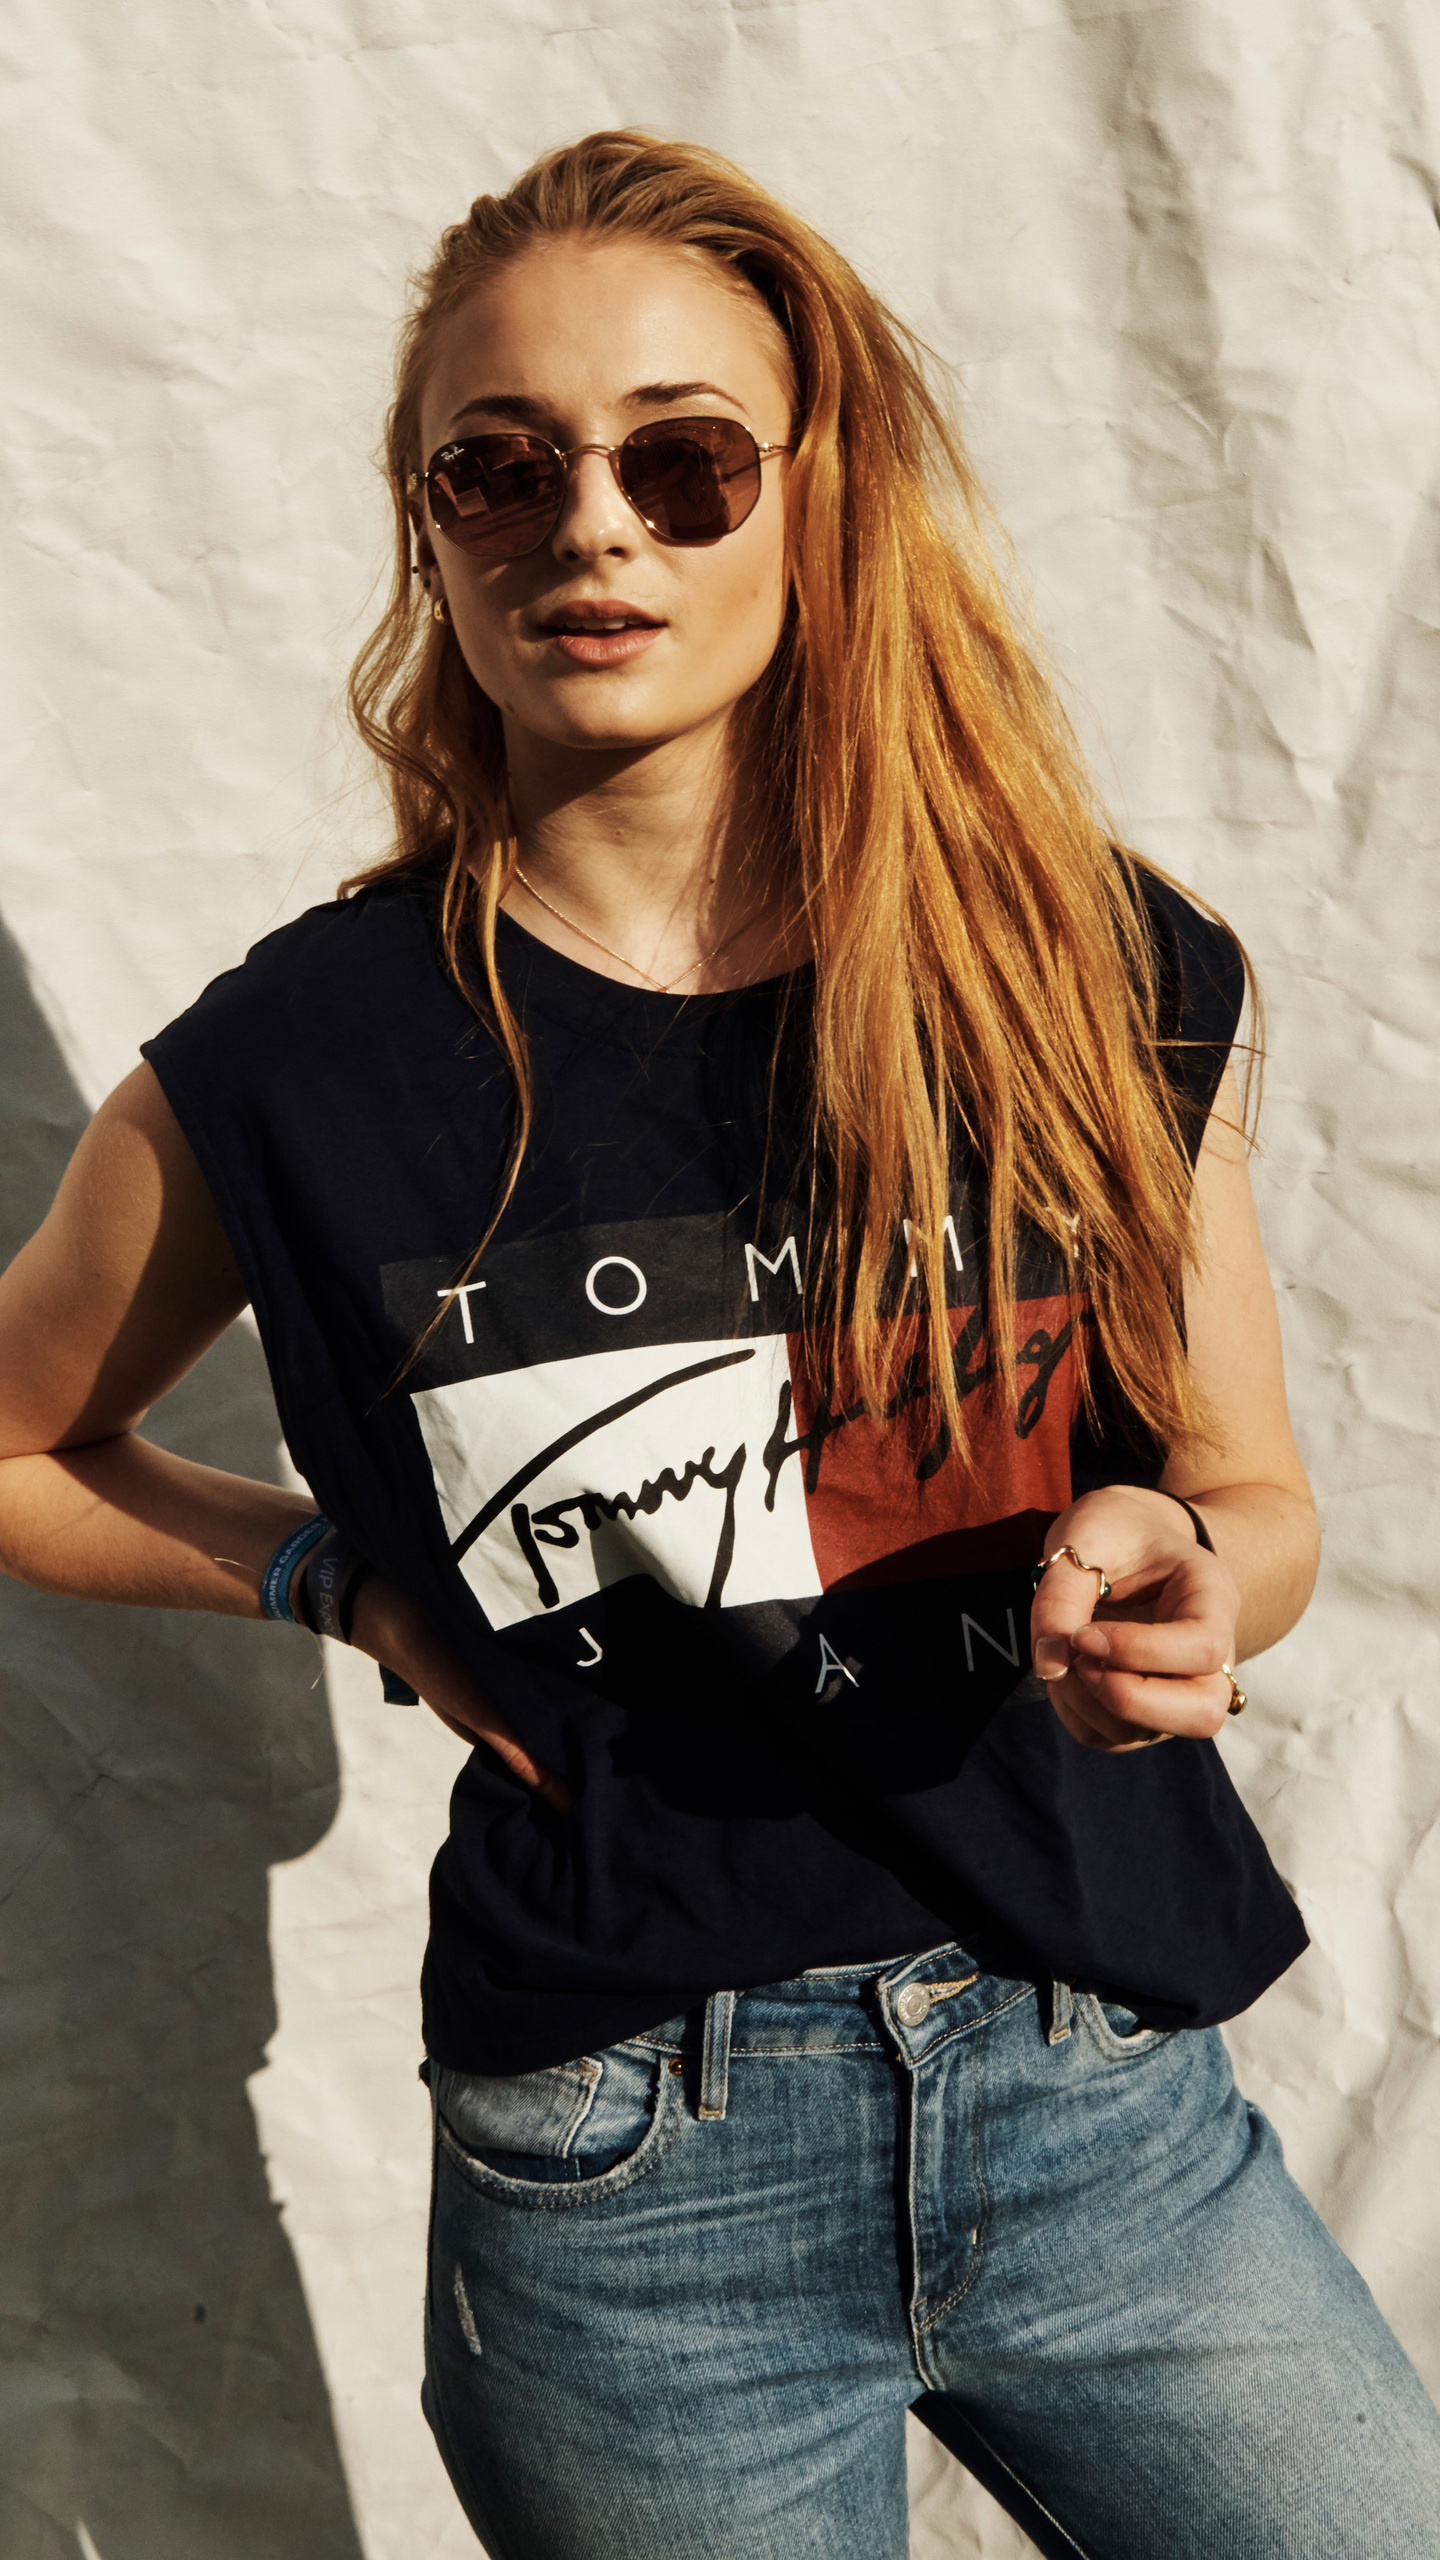 Tommy Hilfiger: Sophie Turner, An English actress, Game of Thrones, The iconic brand. 1440x2560 HD Background.